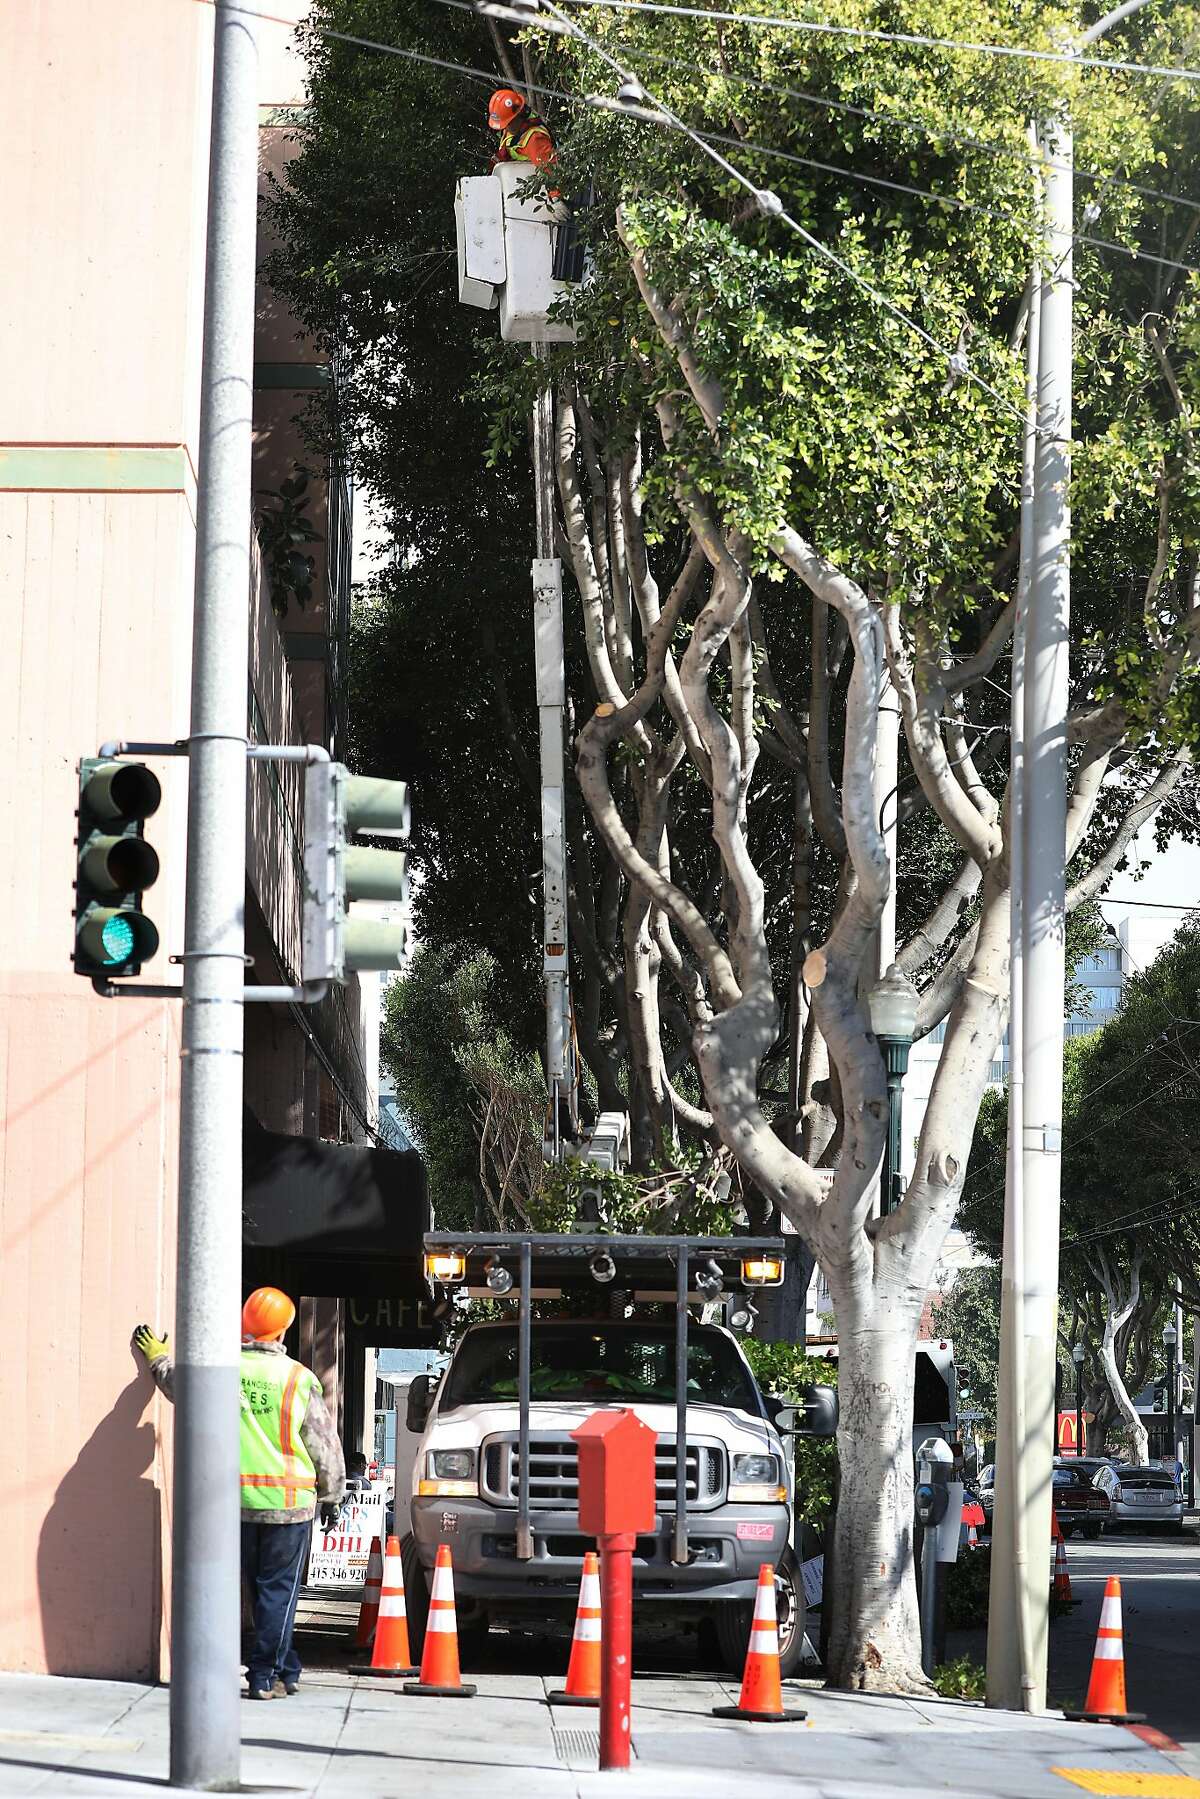 Sam Tupou, Department of Public Works arborist, drops a branch to the ground as he trims trees on Fillmore Street on Friday, September 7, 2018 in San Francisco, Calif.